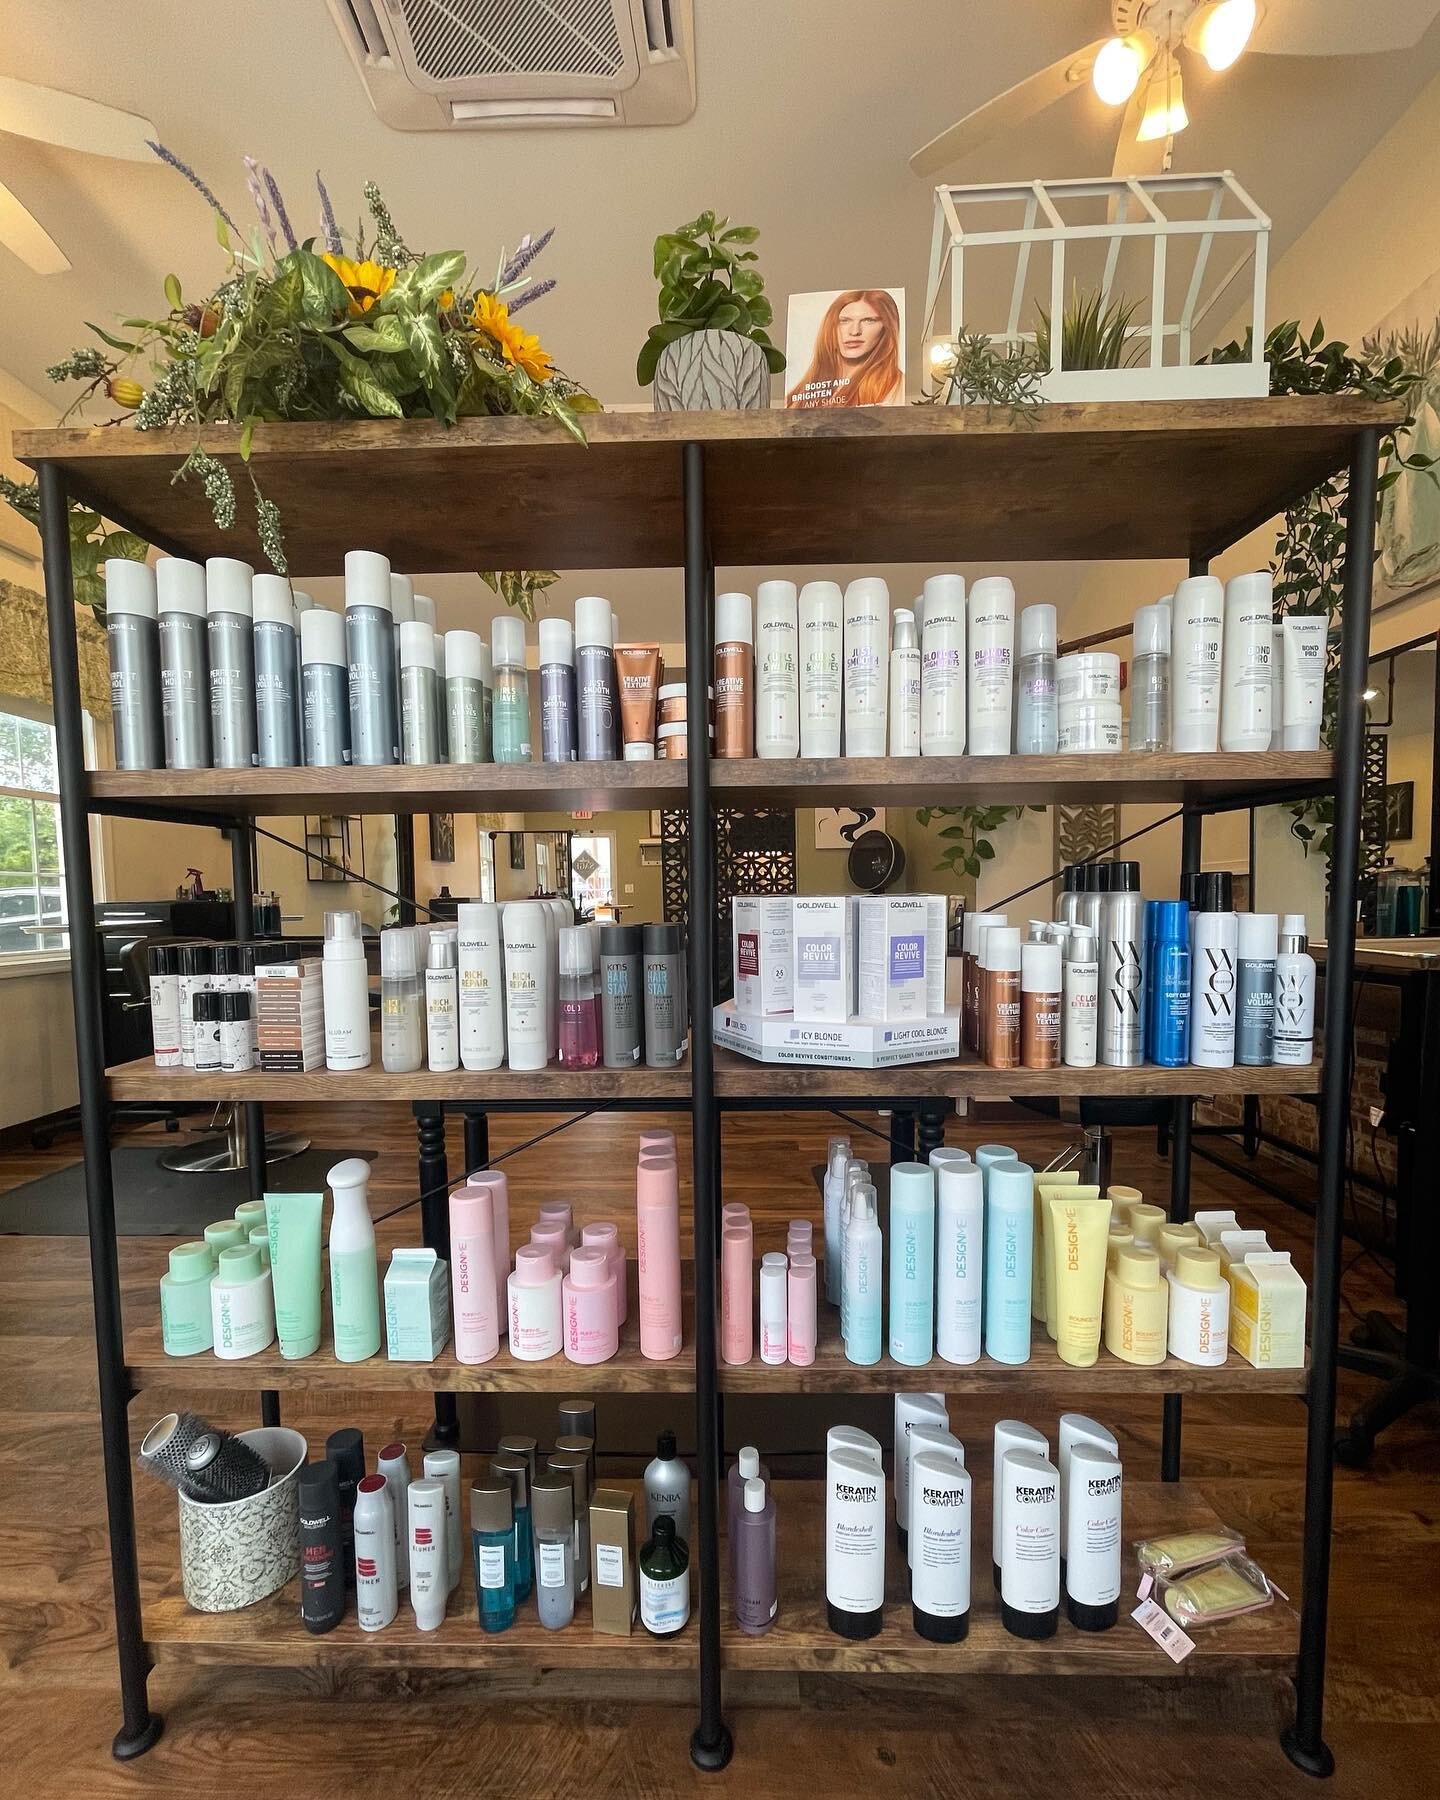 We are happy to introduce our Product Reward Program! ✨
Stop in and ask us how you can benefit from using our professional products.